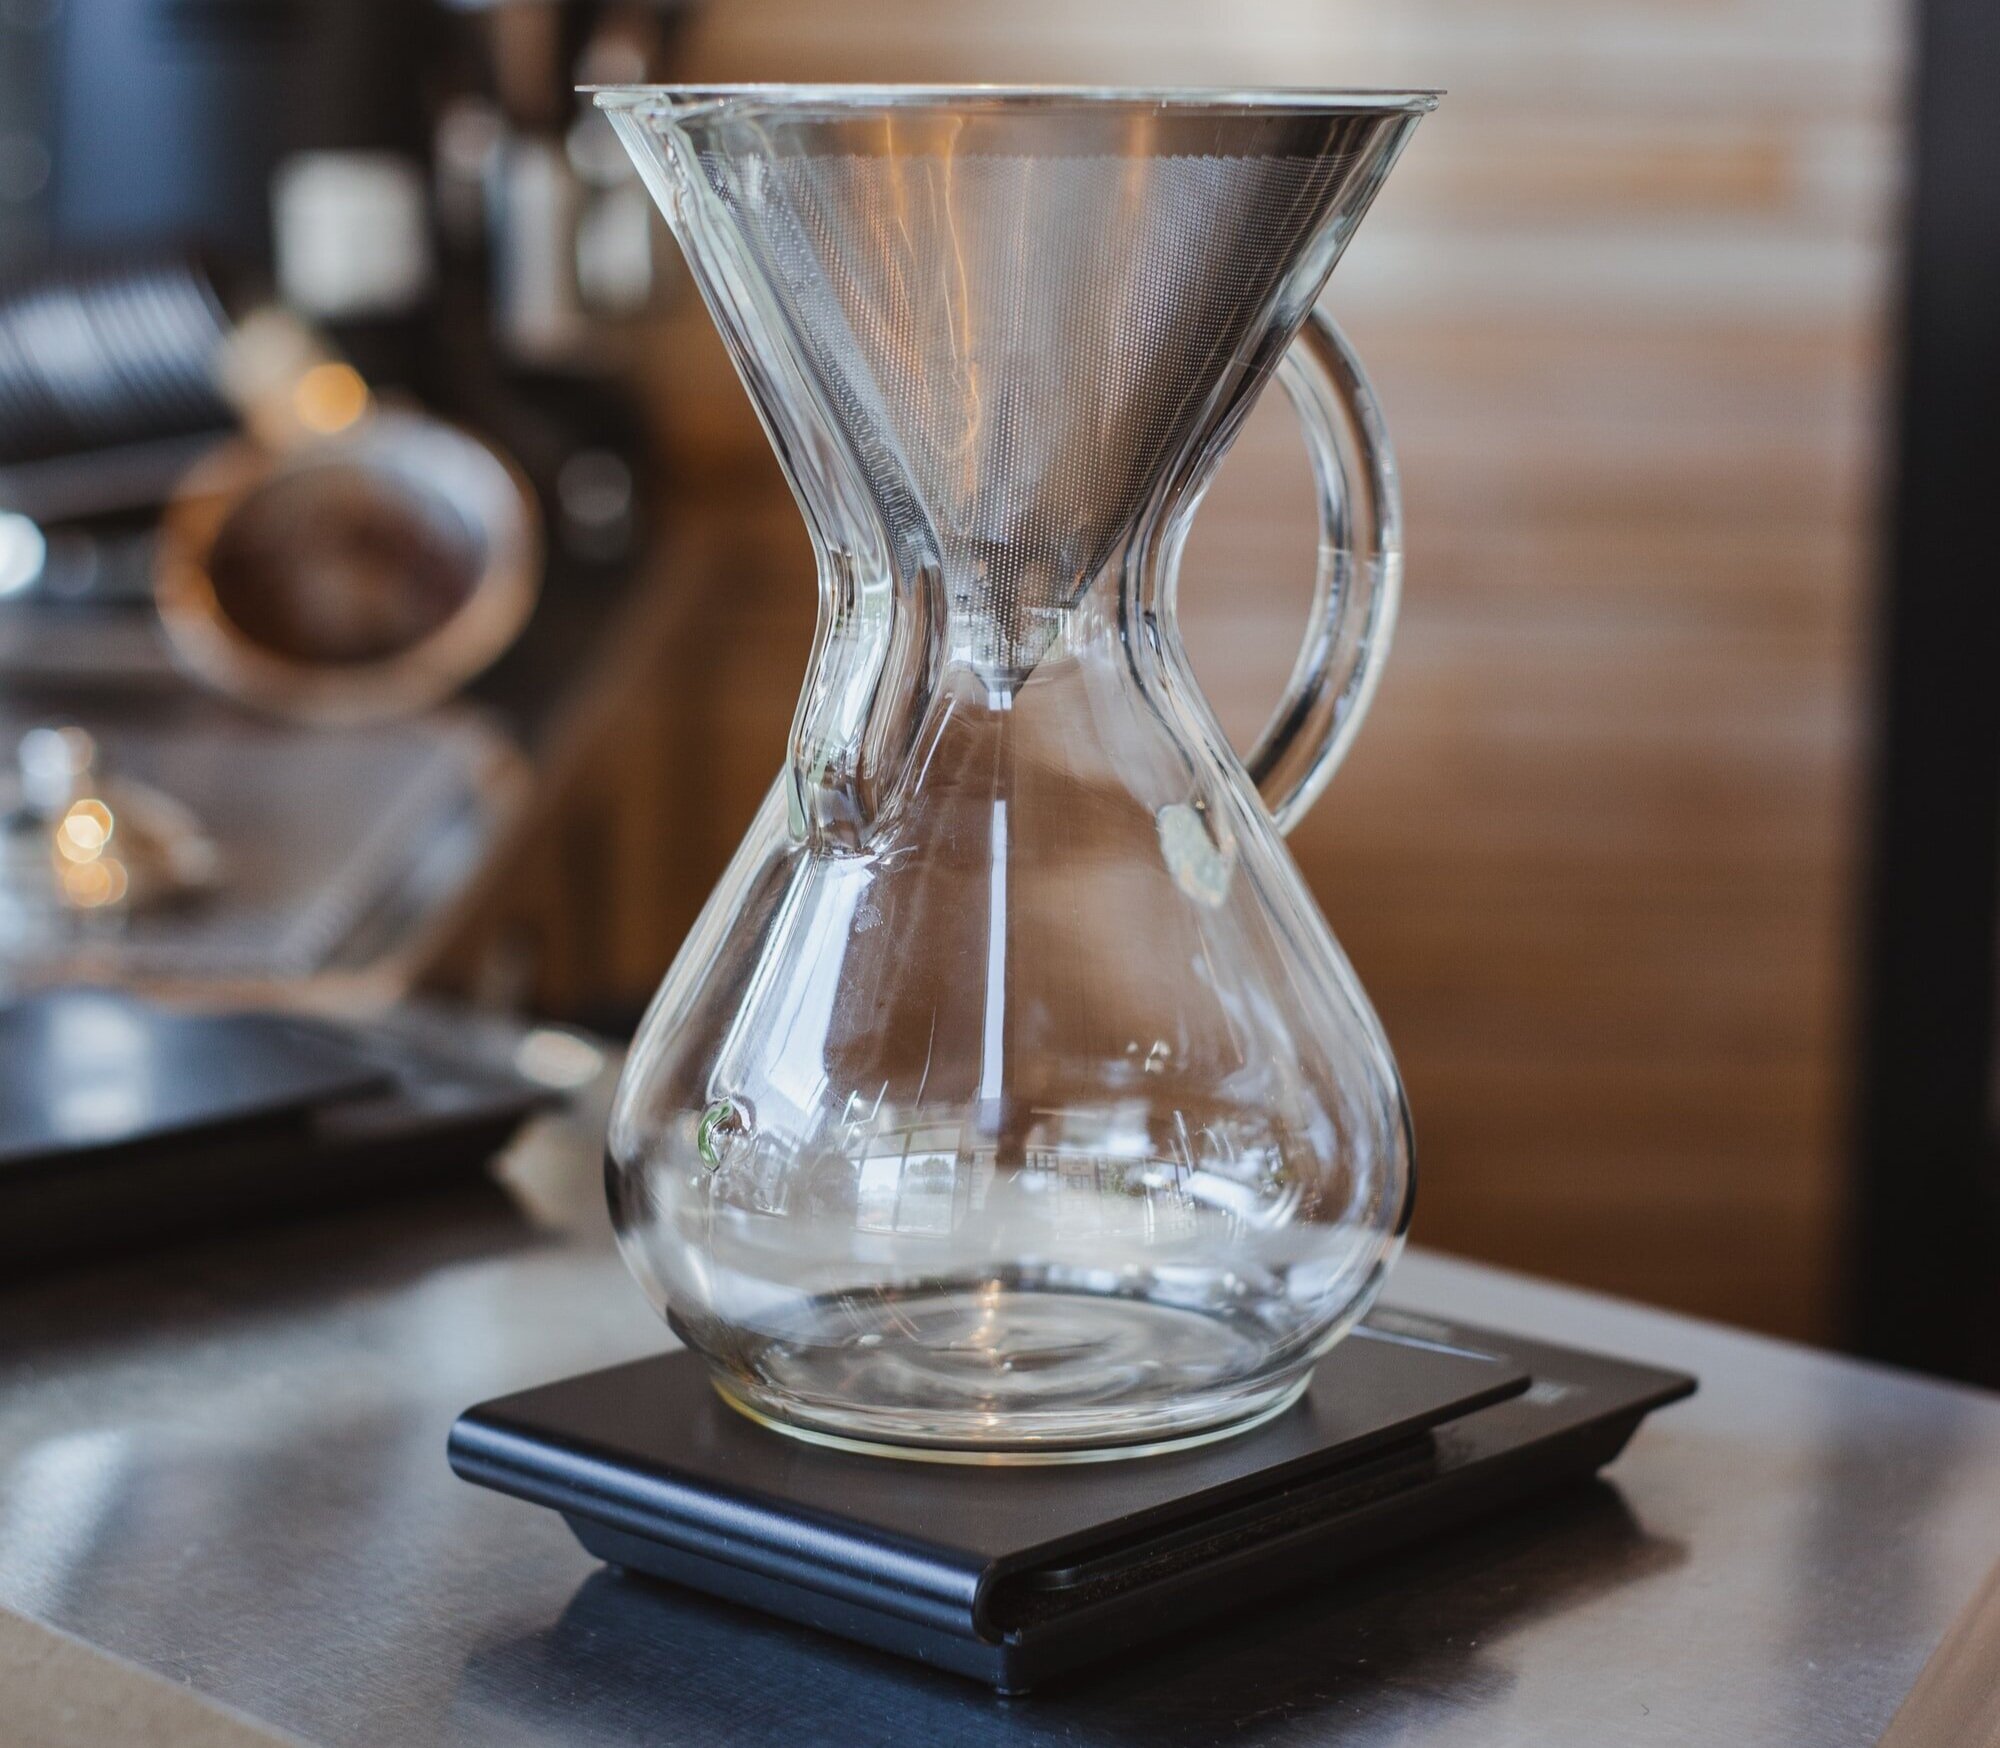 Hario Drip Coffee Scales Review